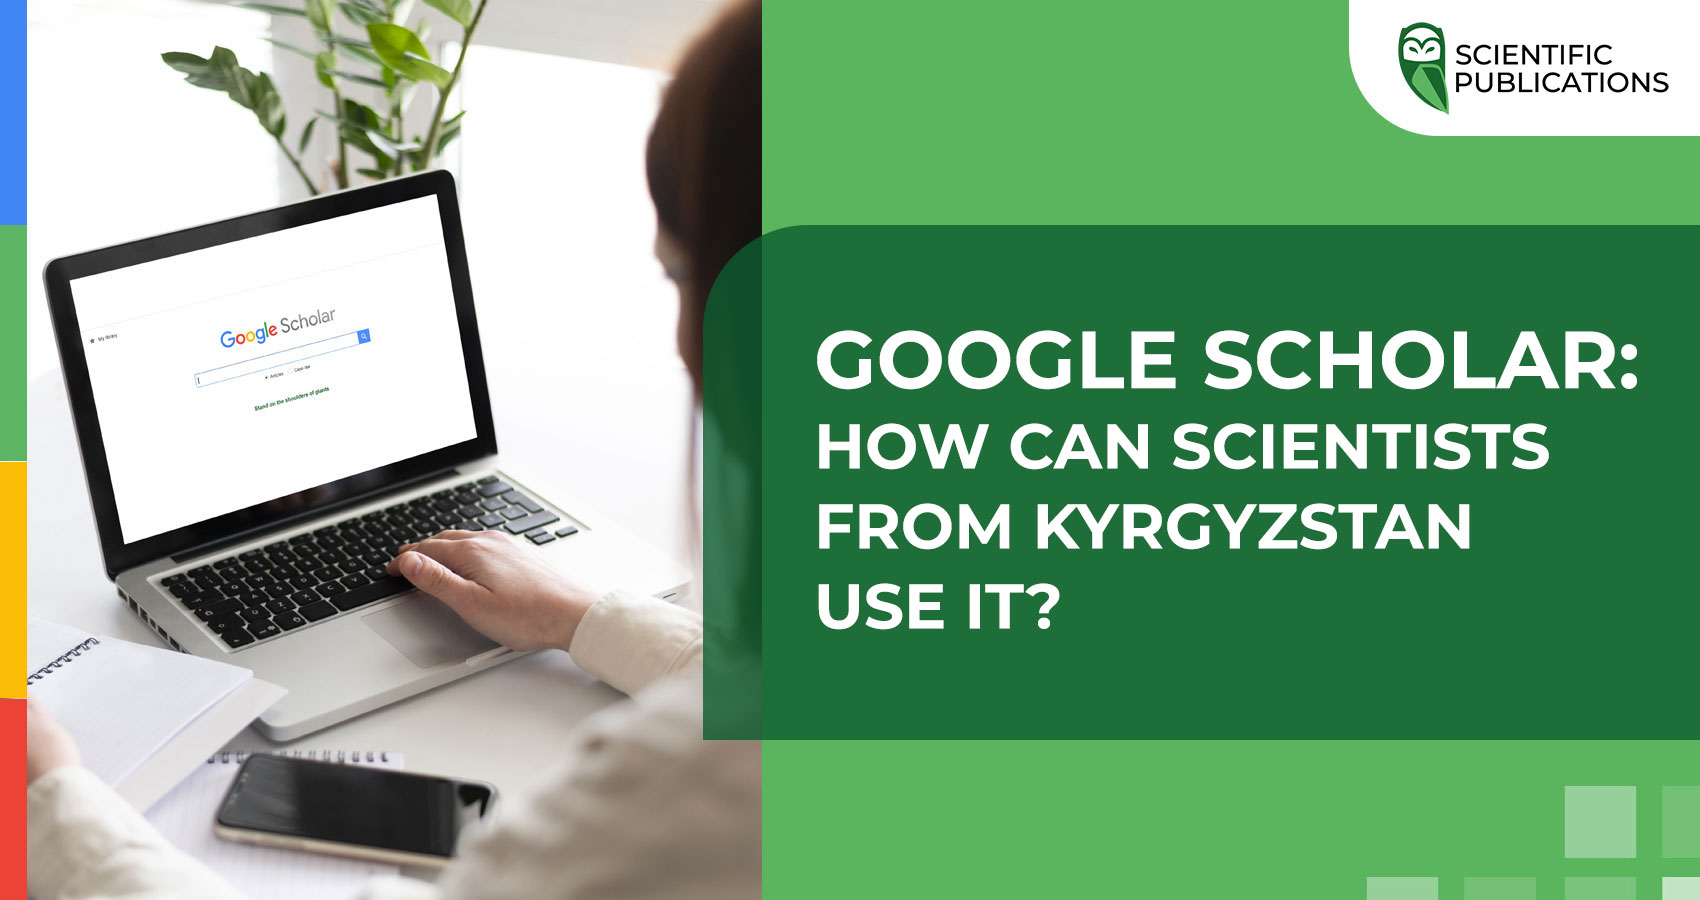 Google Scholar: how to use a scientist from Kyrgyzstan?